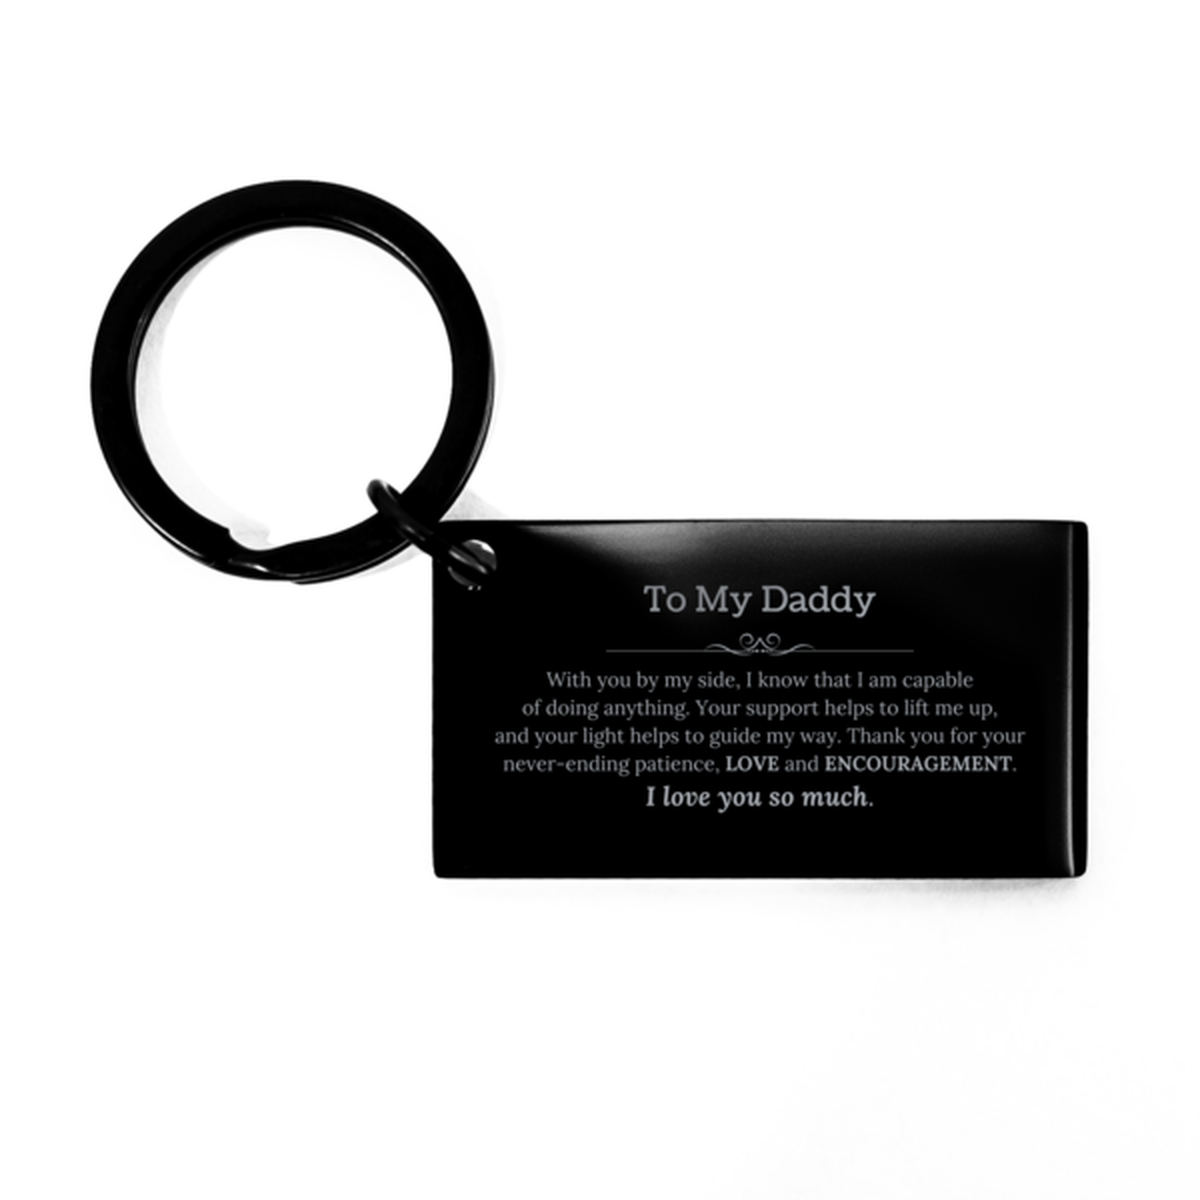 Appreciation Daddy Keychain Gifts, To My Daddy Birthday Christmas Wedding Keepsake Gifts for Daddy With you by my side, I know that I am capable of doing anything. I love you so much